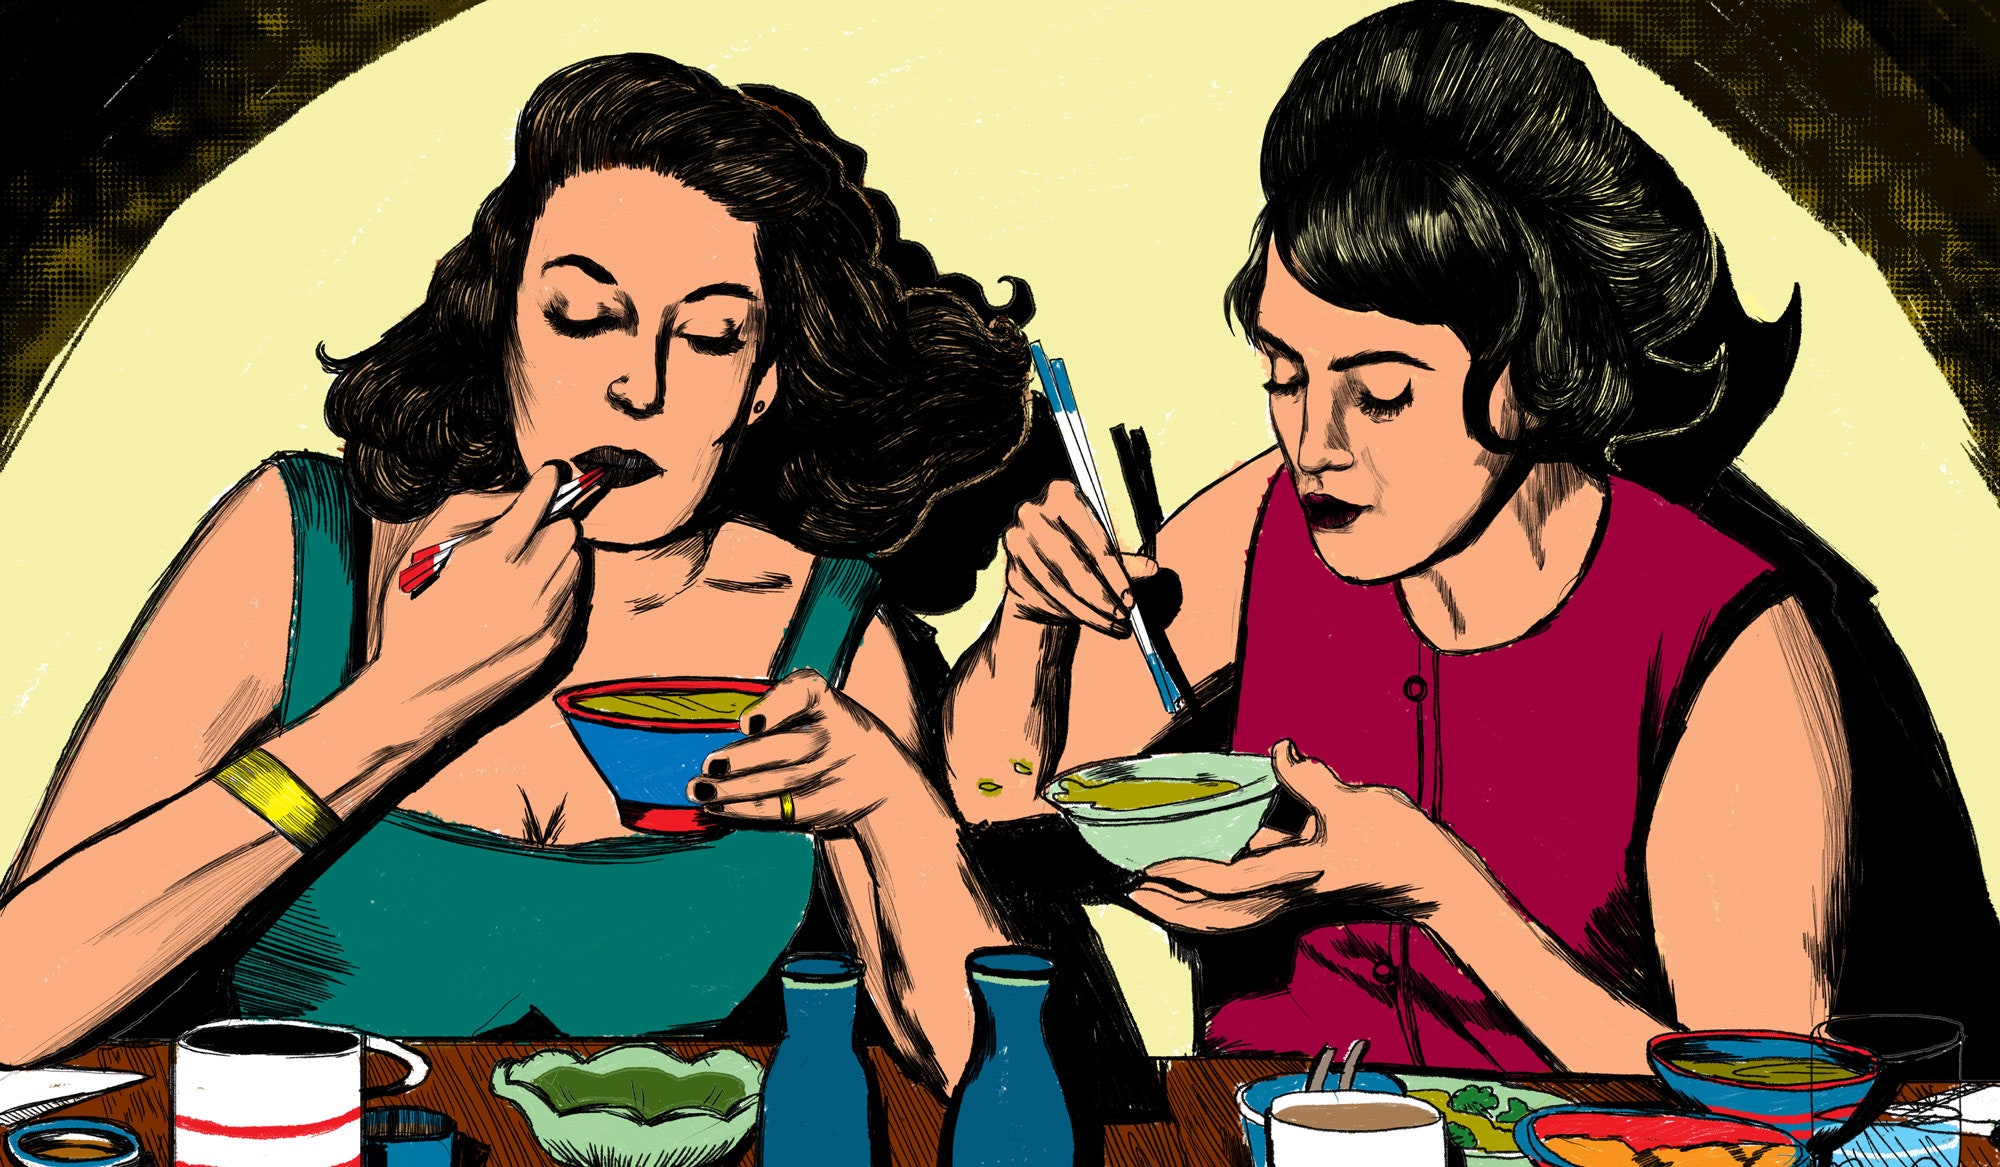 ben rake recommends Women Eating Out Other Women